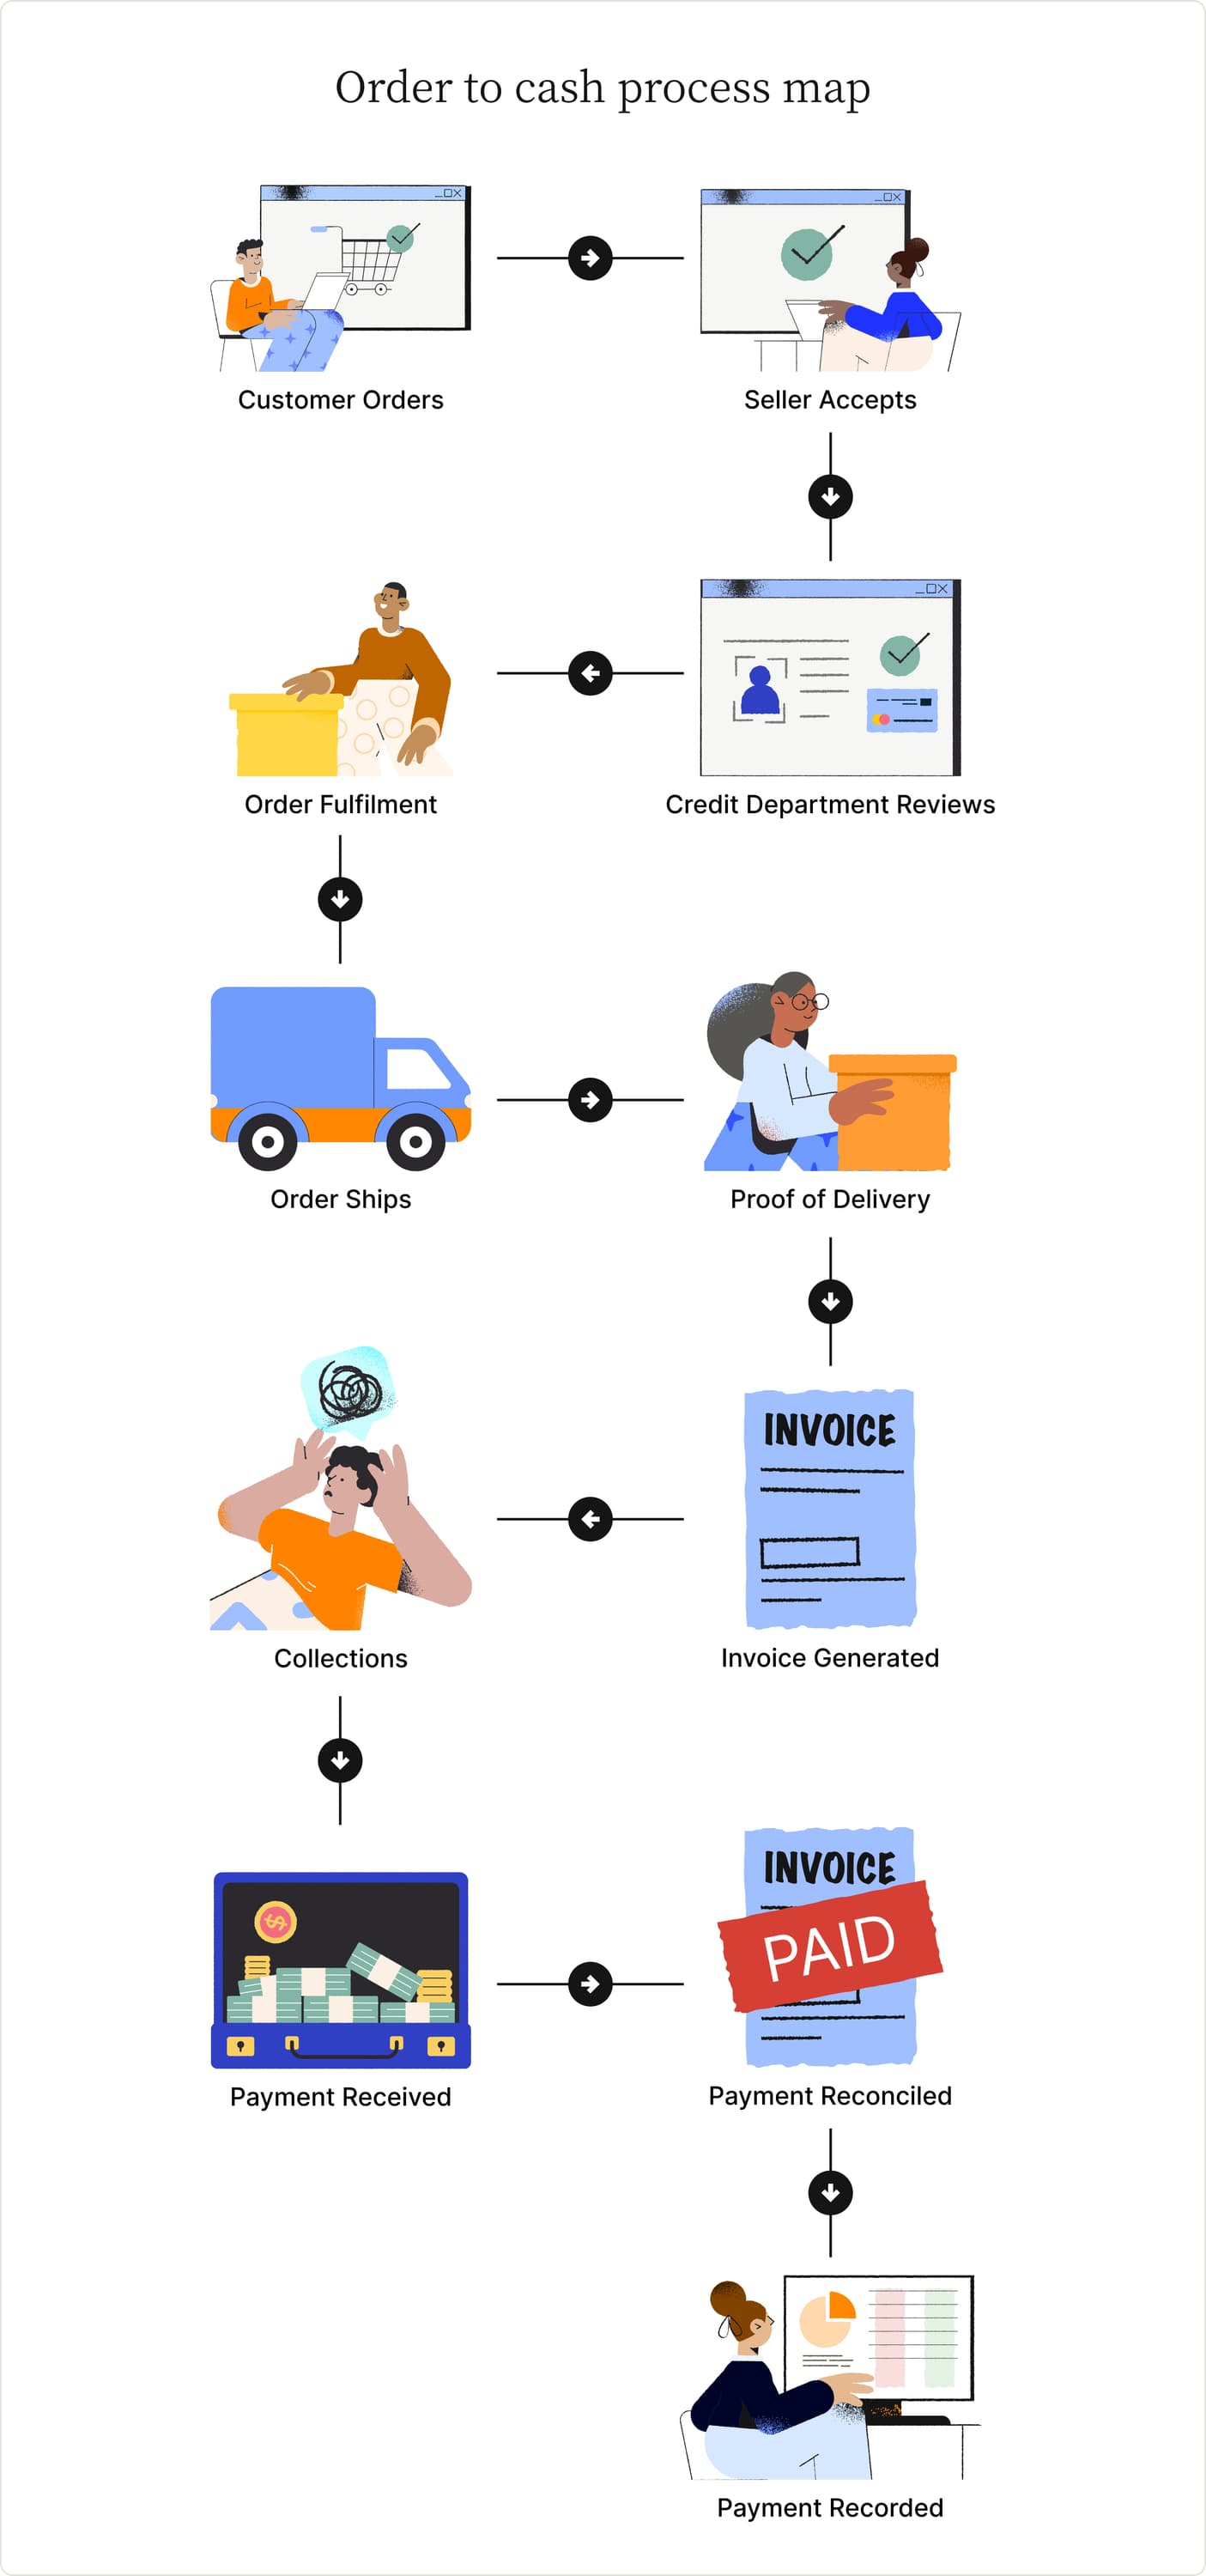 Order to cash process map